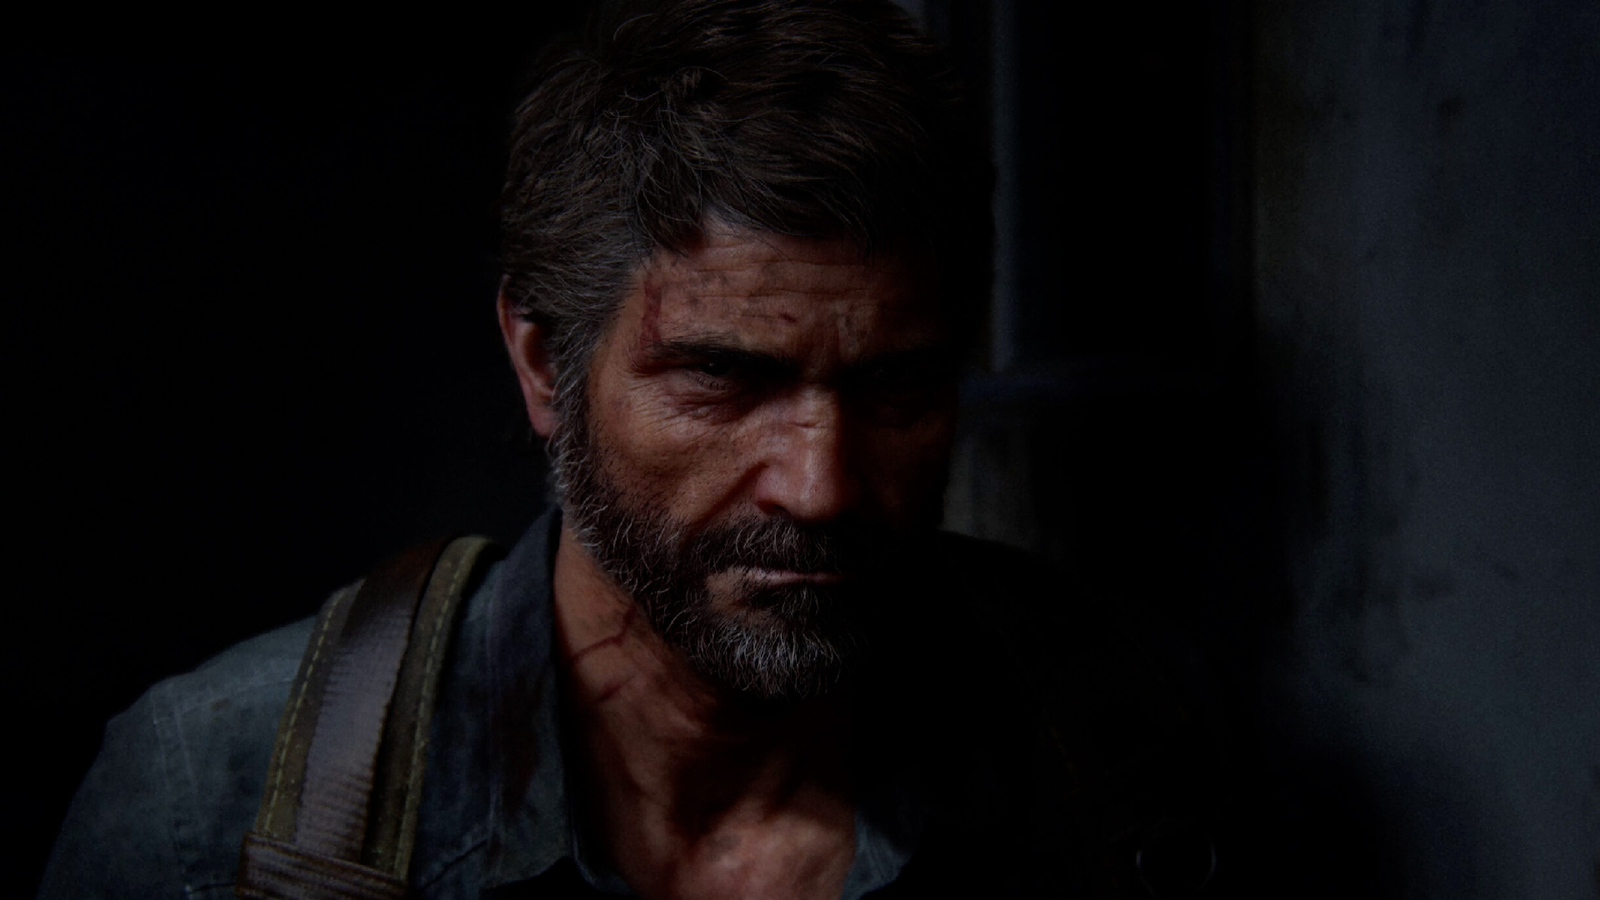 UsedThe Last Of US Part II For PlayStation 4 PS4 PS5 RPG 